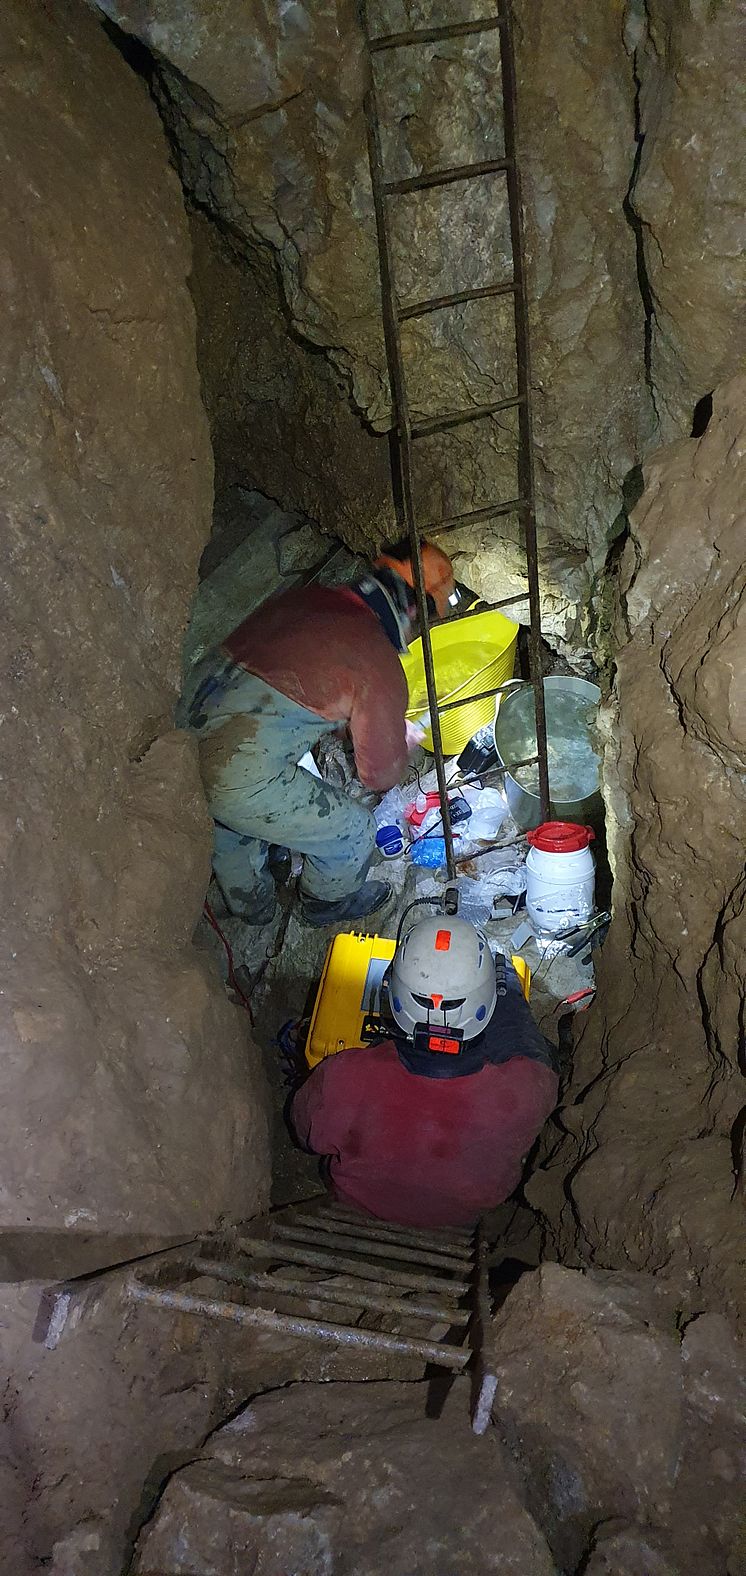 Researchers collecting samples from limestone bedrock deep below the ground in Goodluck Mine, Derbyshire (credit J. White)